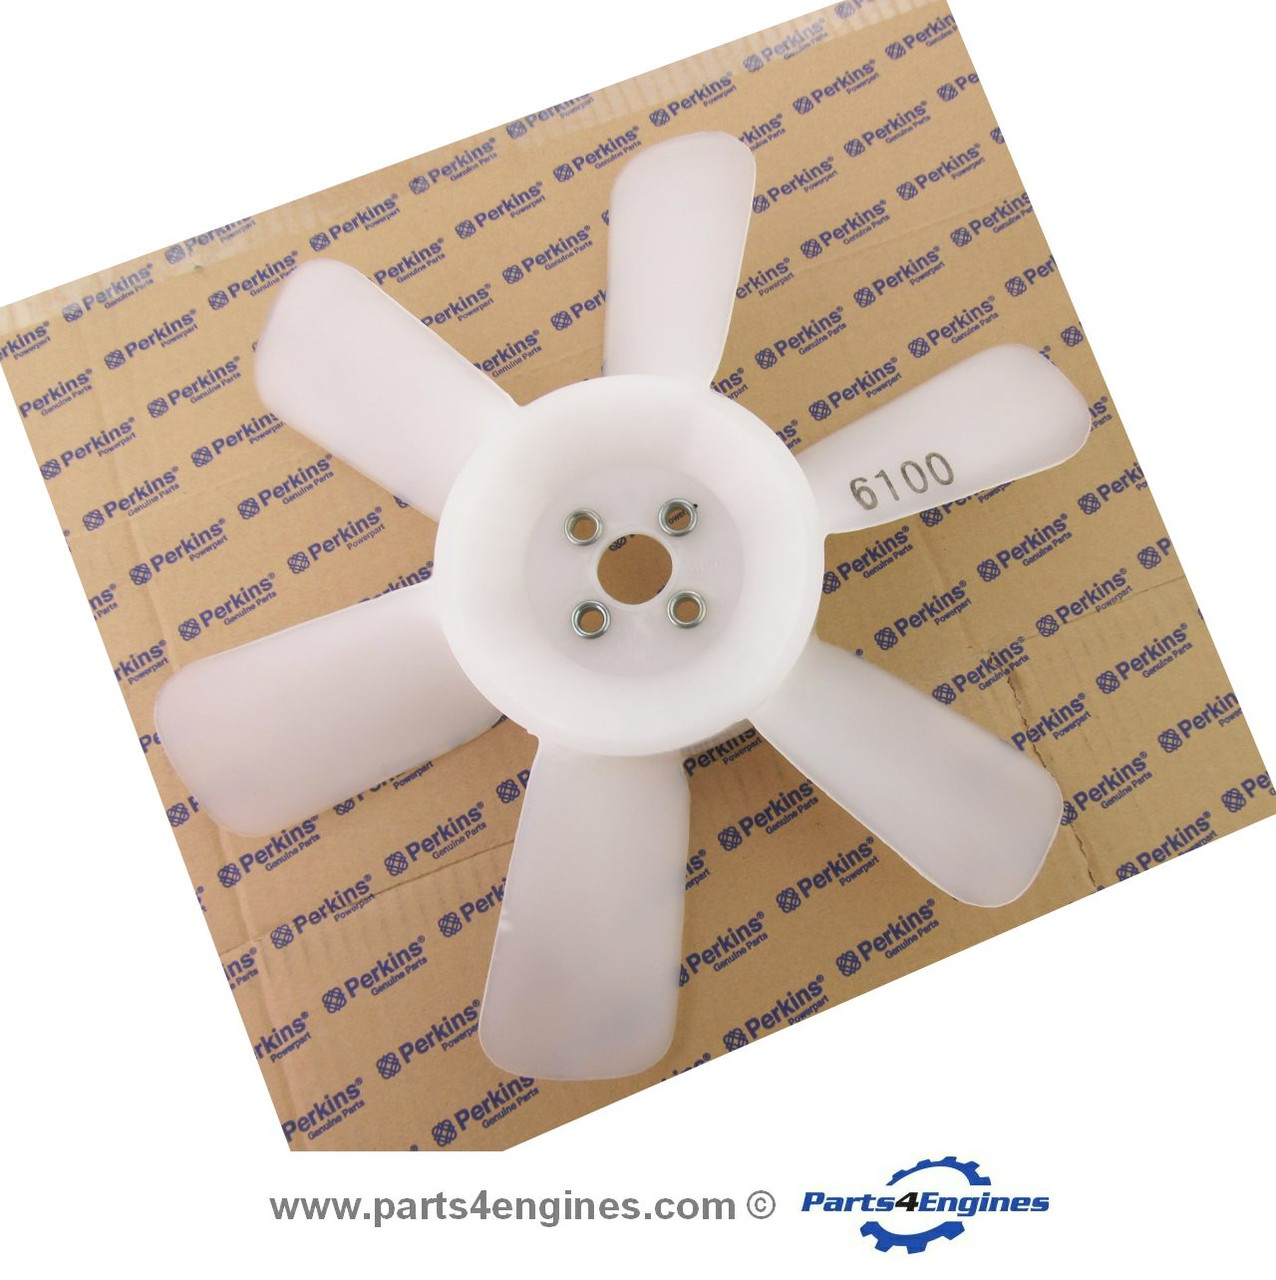 Perkins 404F-22  engine cooling fan, from parts4engines.com